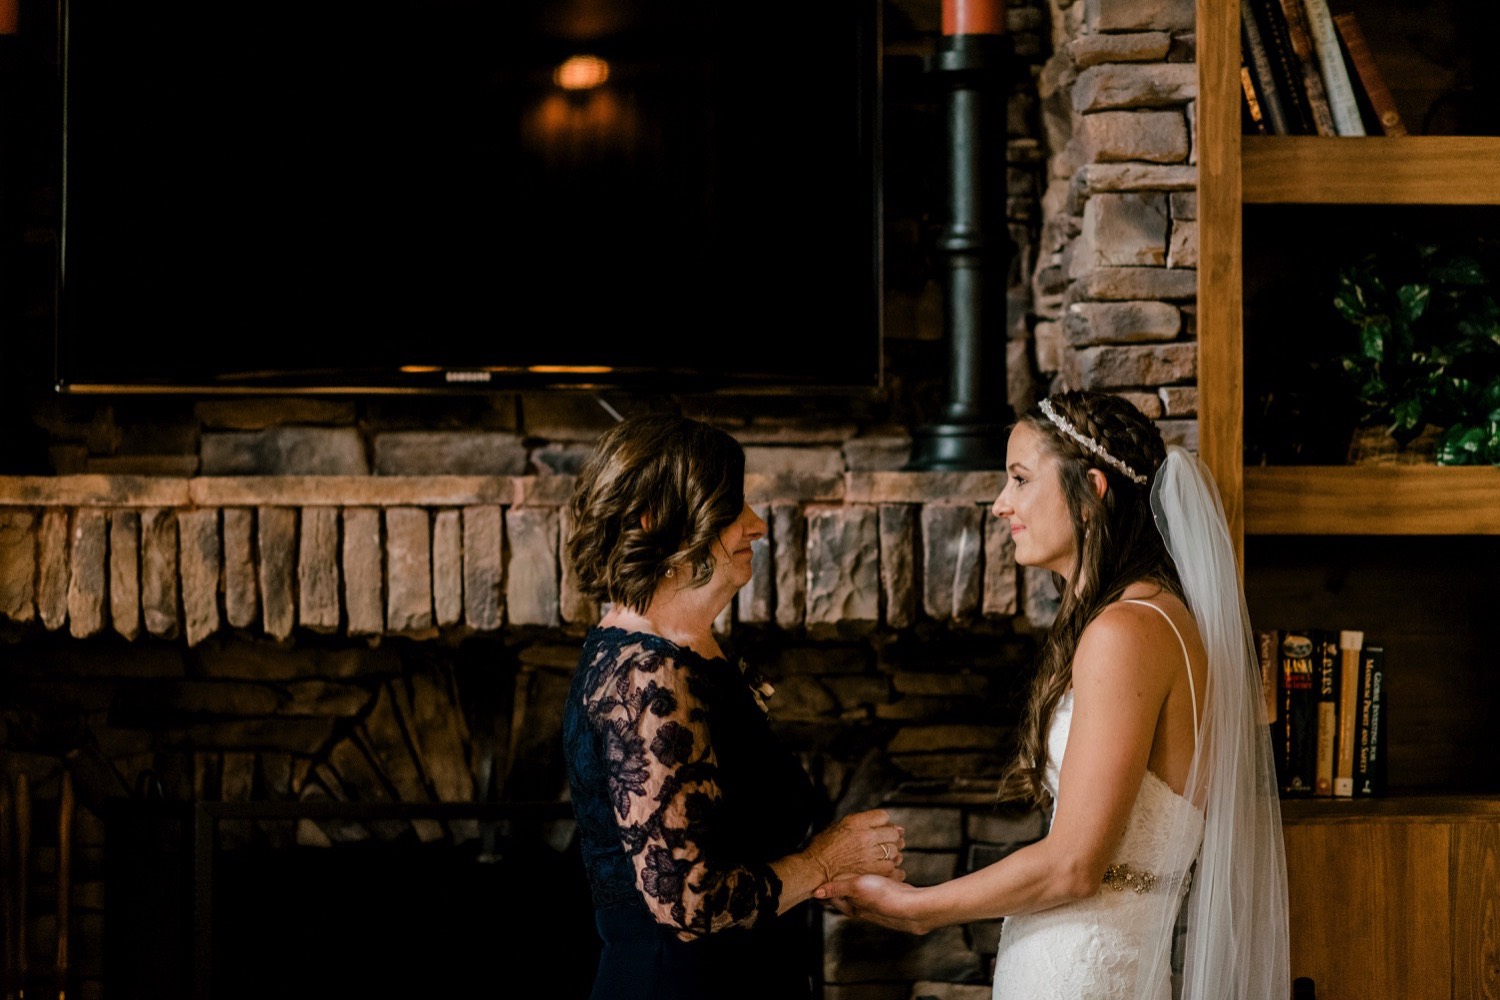 Kristen, the bride, and her mother have a quiet moment together before the start of their ceremony at Spruce Mountain Ranch in Larkspur, Colorado.